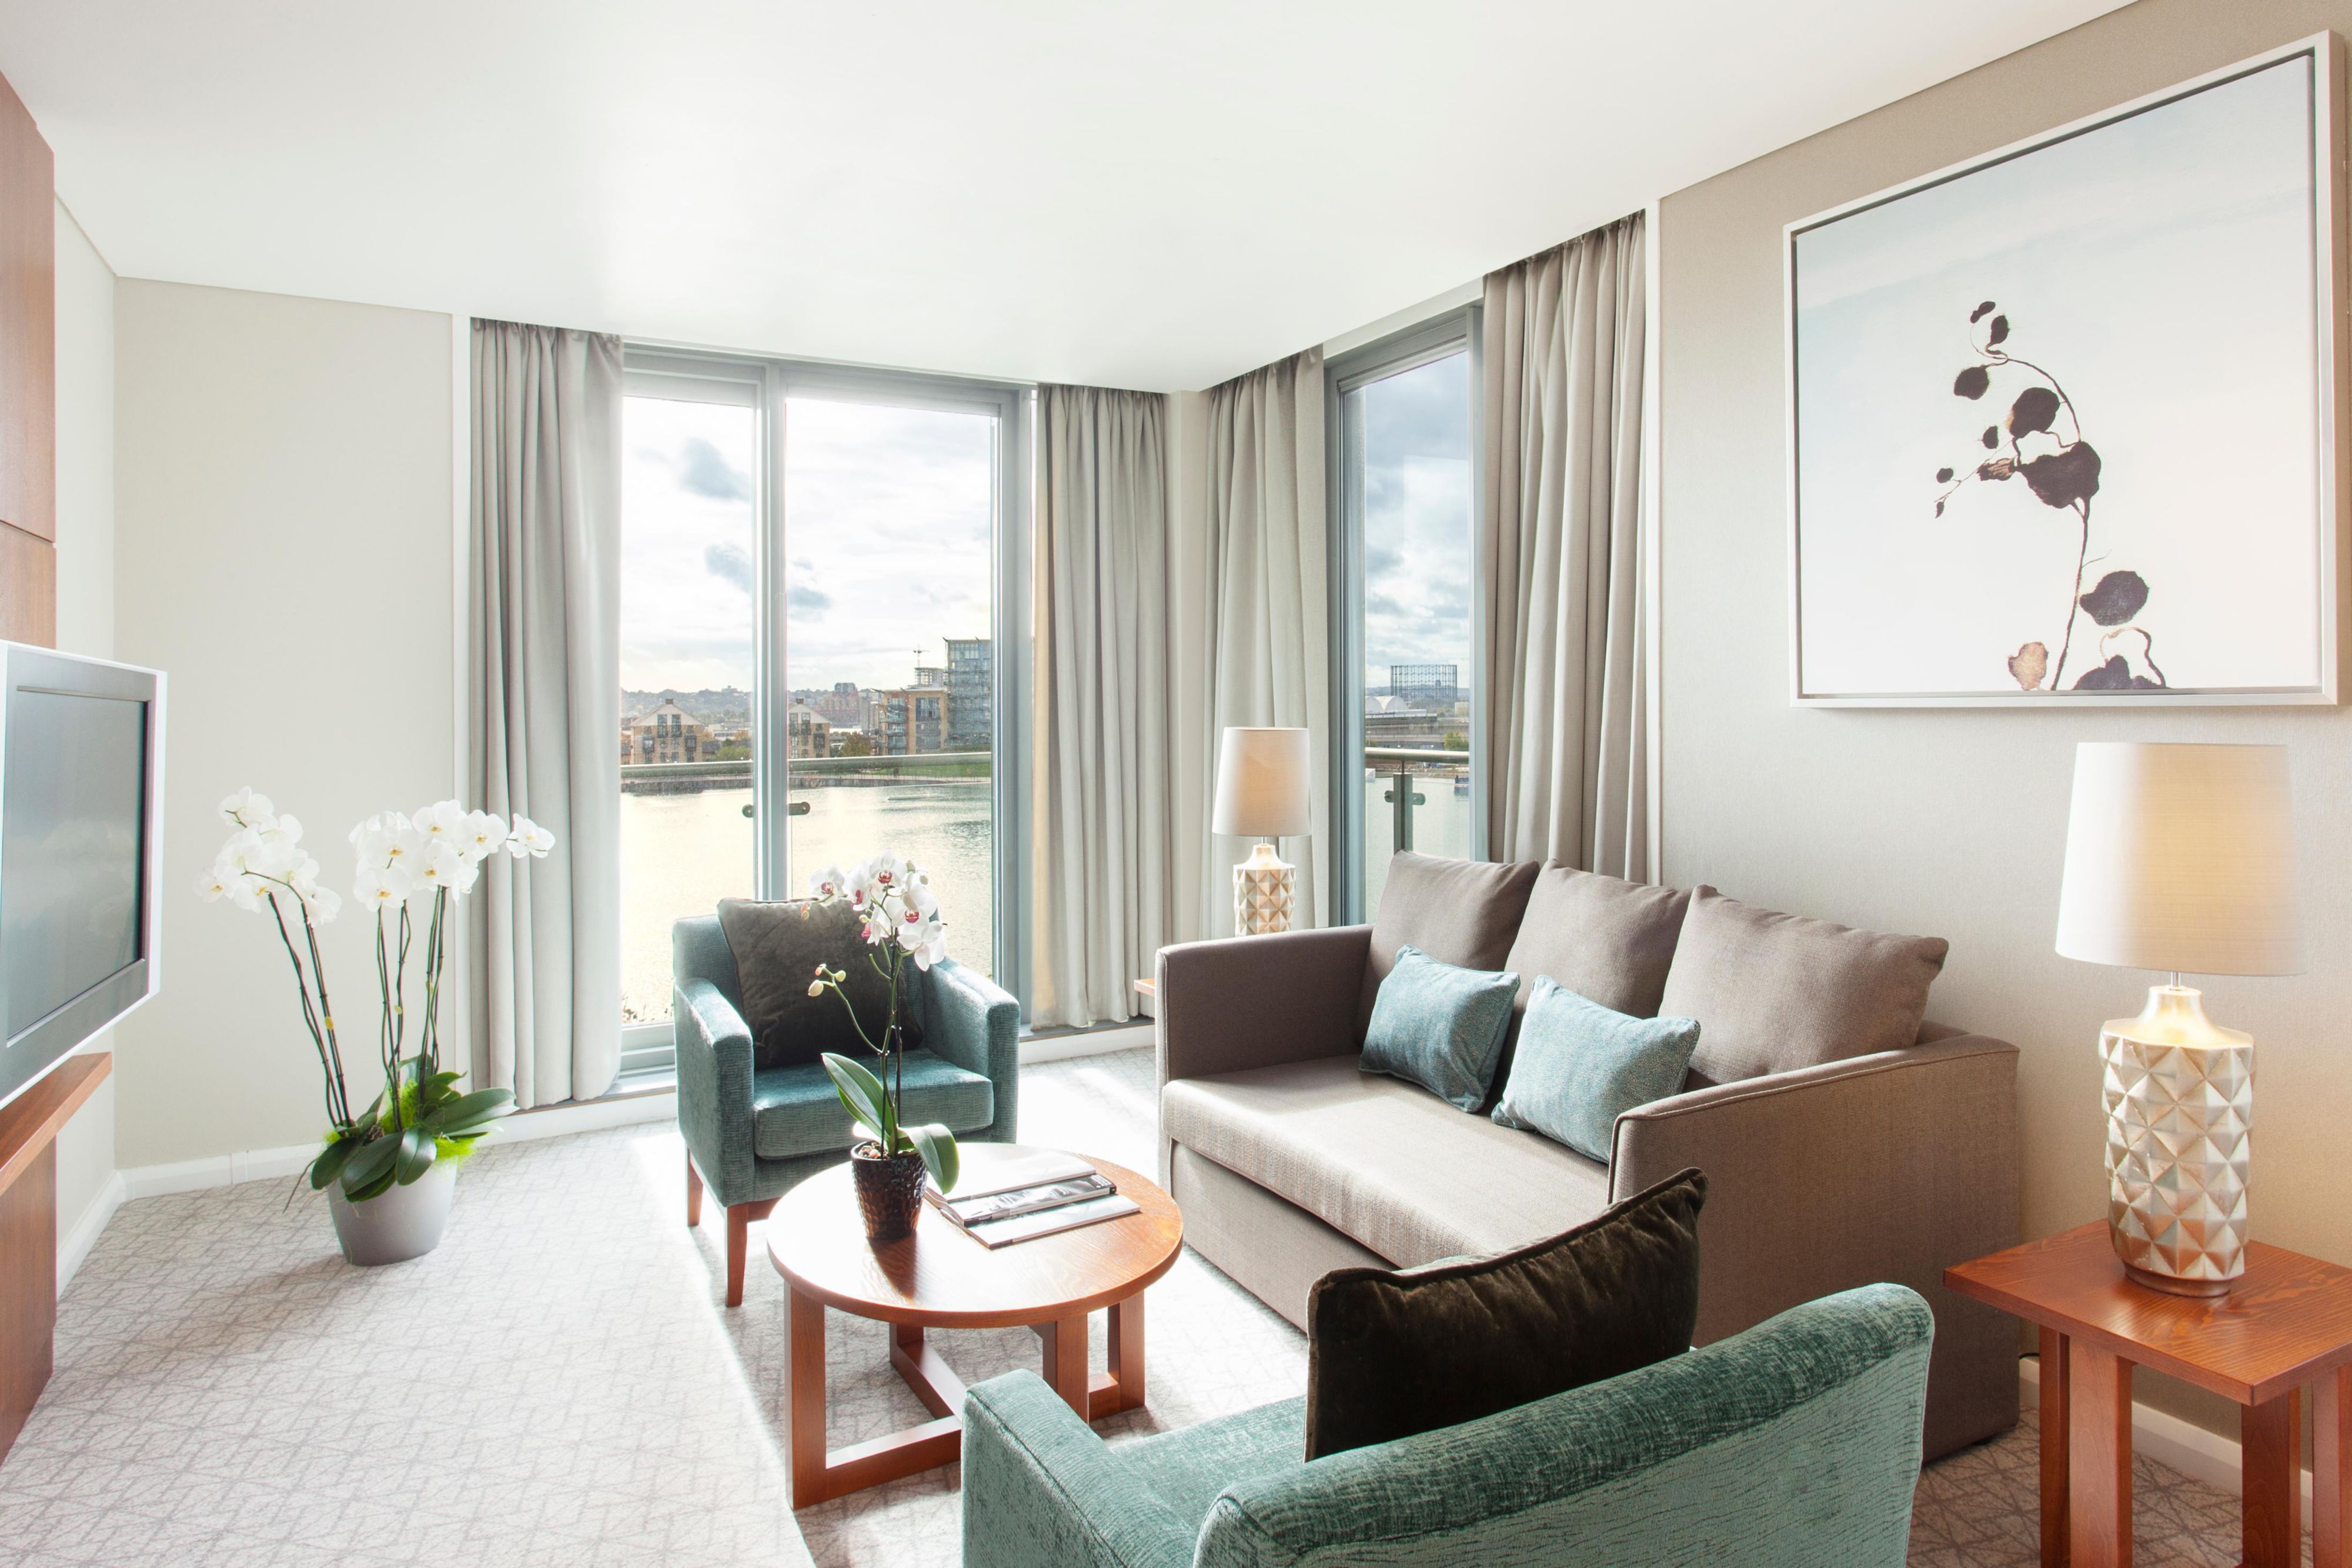 Executive suite living area with panoramic views of the river